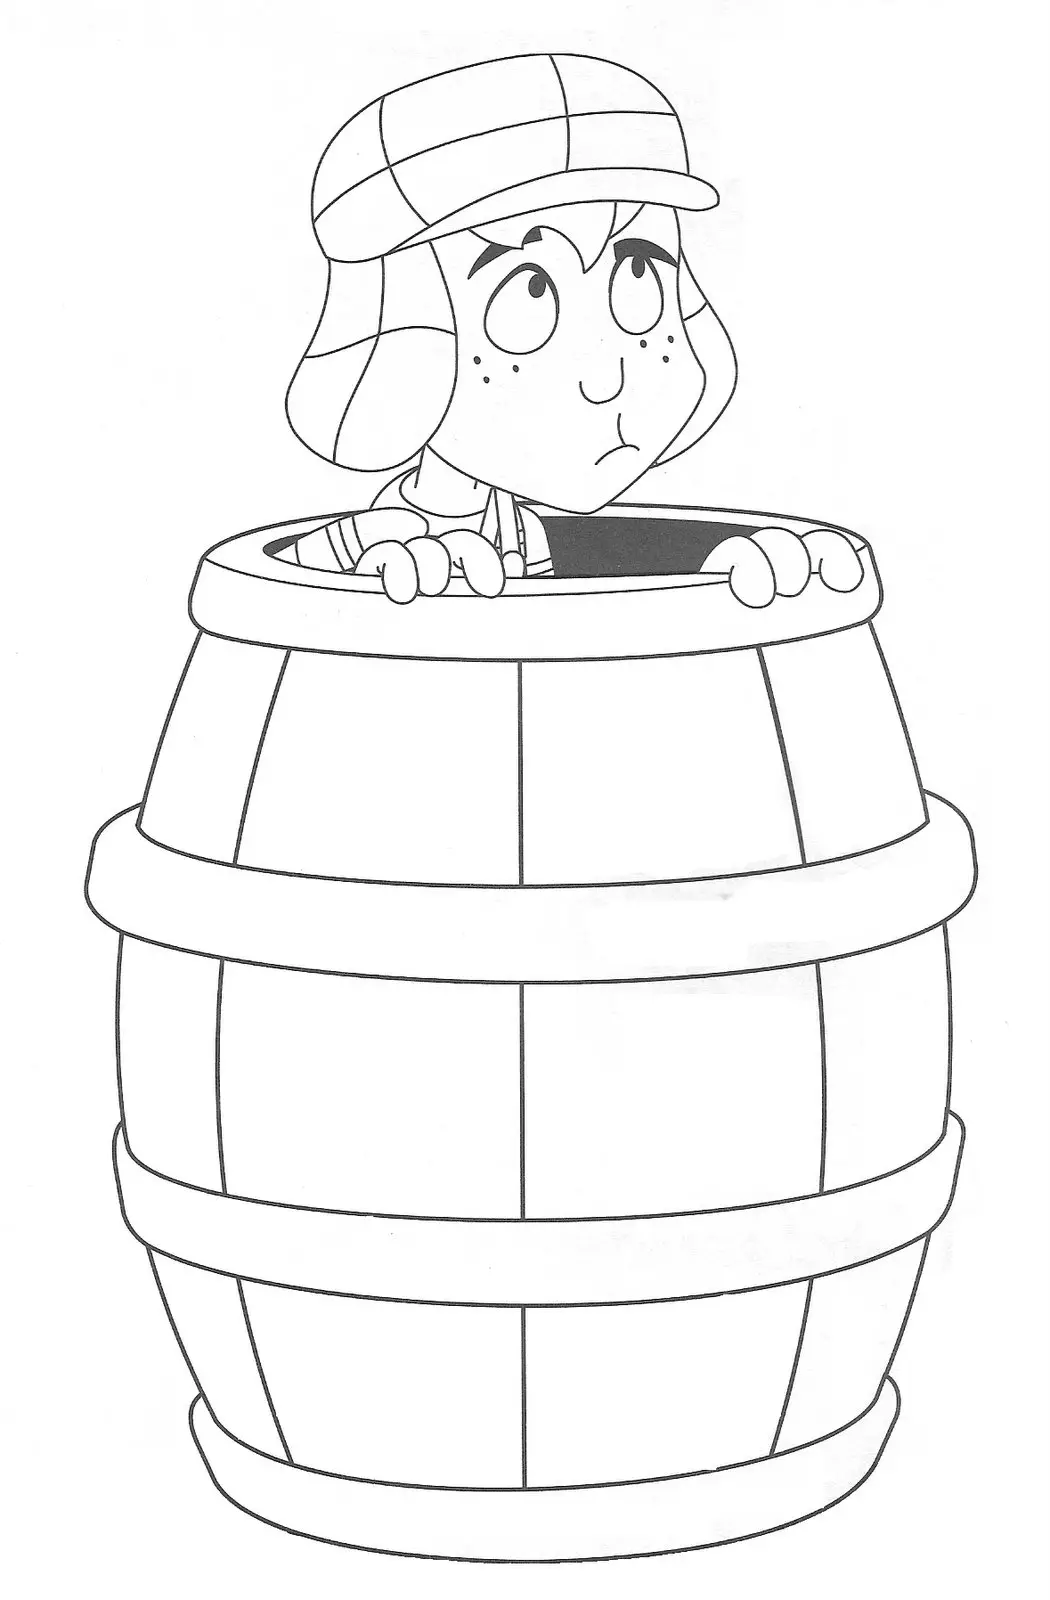 la chilindrina coloring pages - photo #15